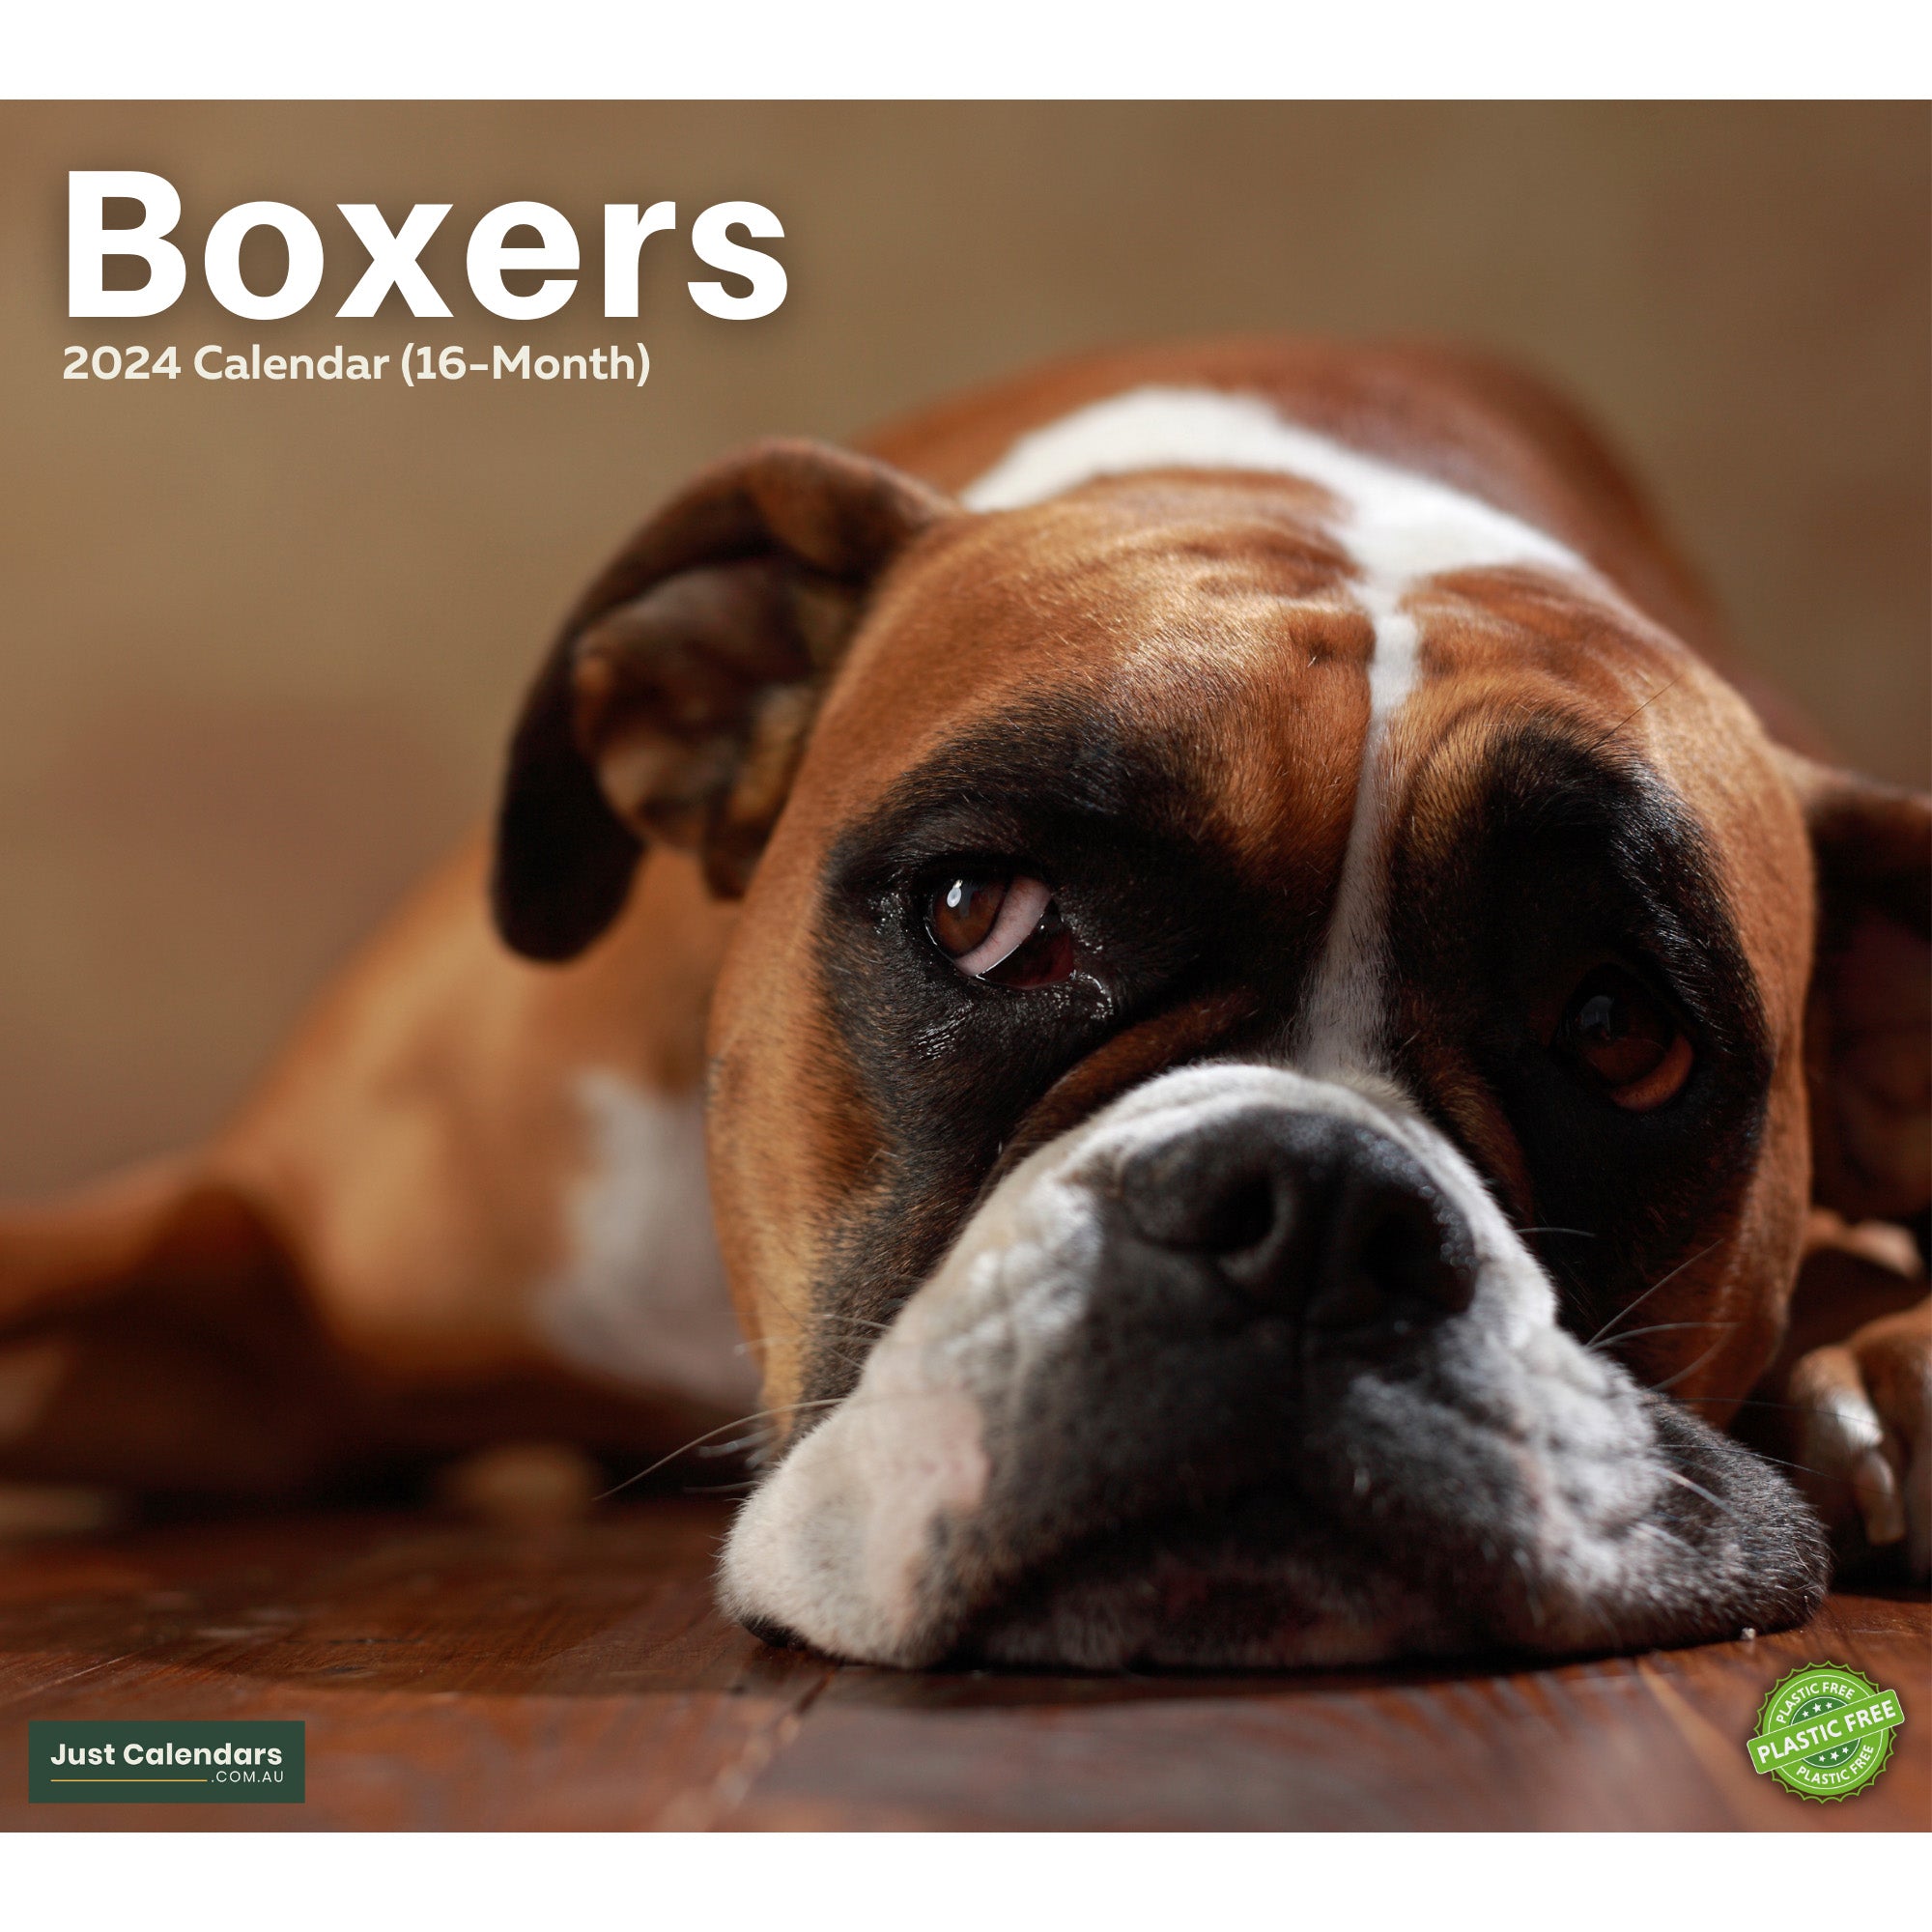 2024 Boxers Deluxe Wall Calendar Dogs & Puppies Calendars By Just